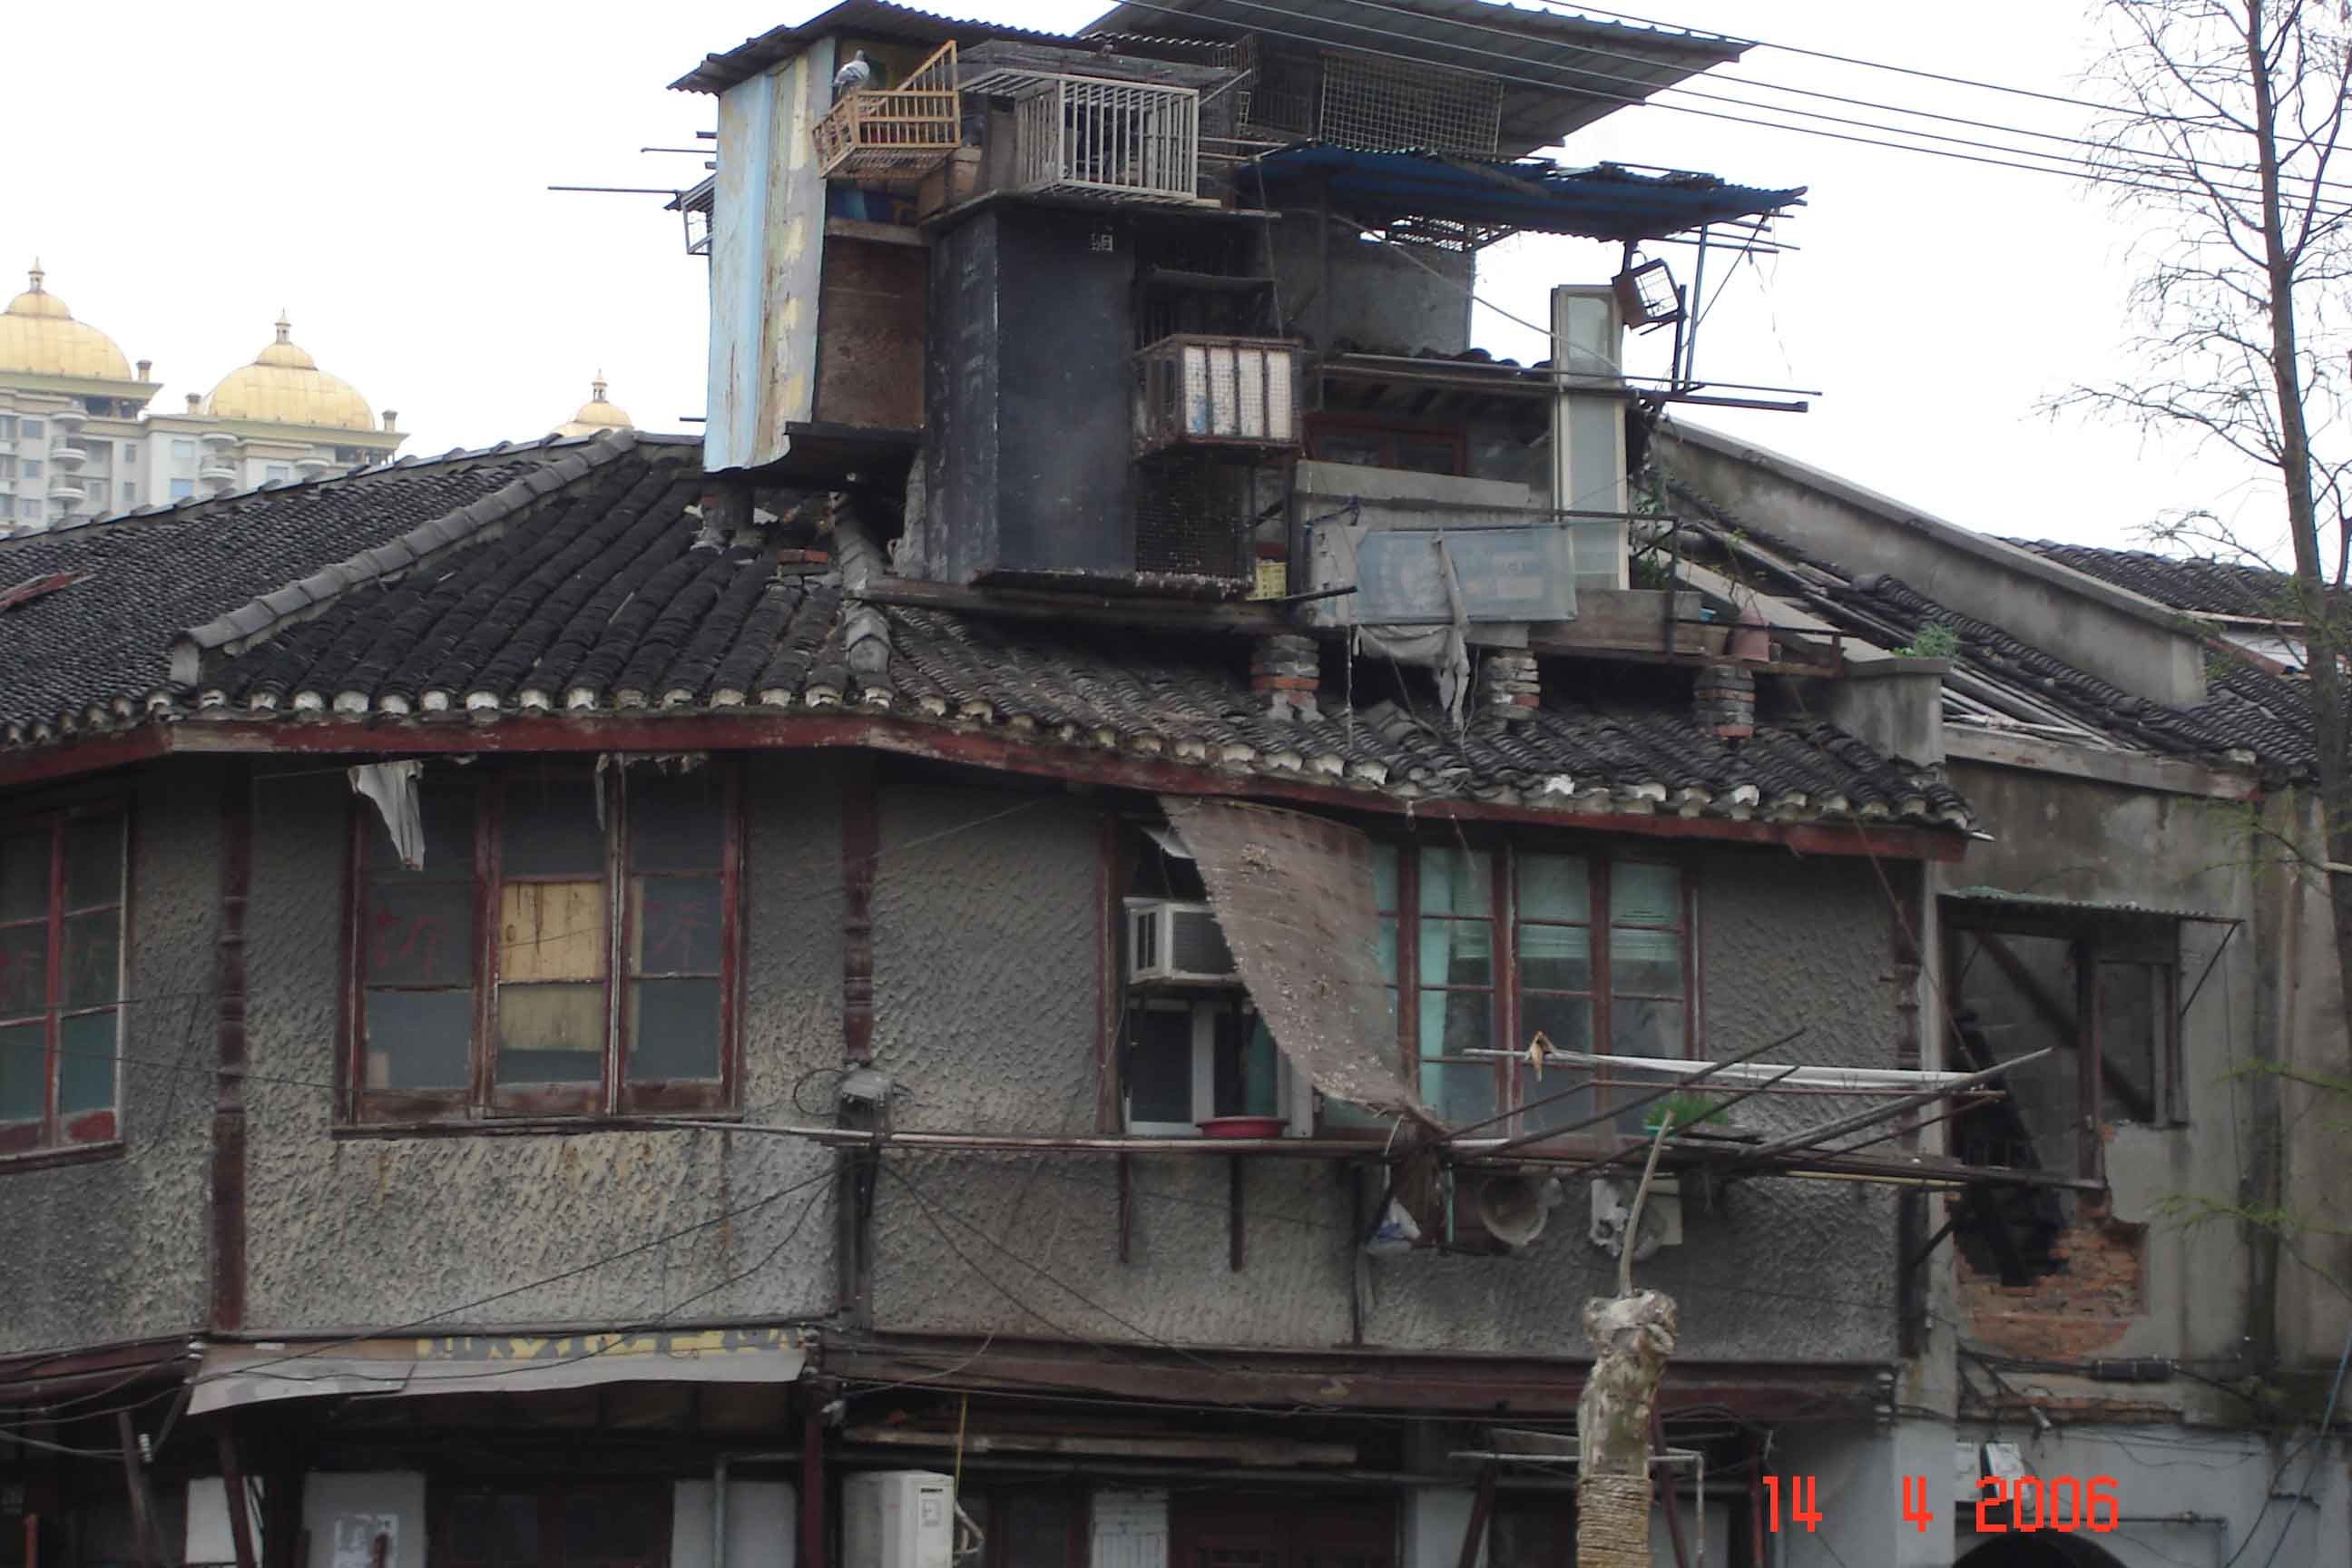 Ramshackle old house with Pigeon Loft - Old Chinese Quarter Shanghai